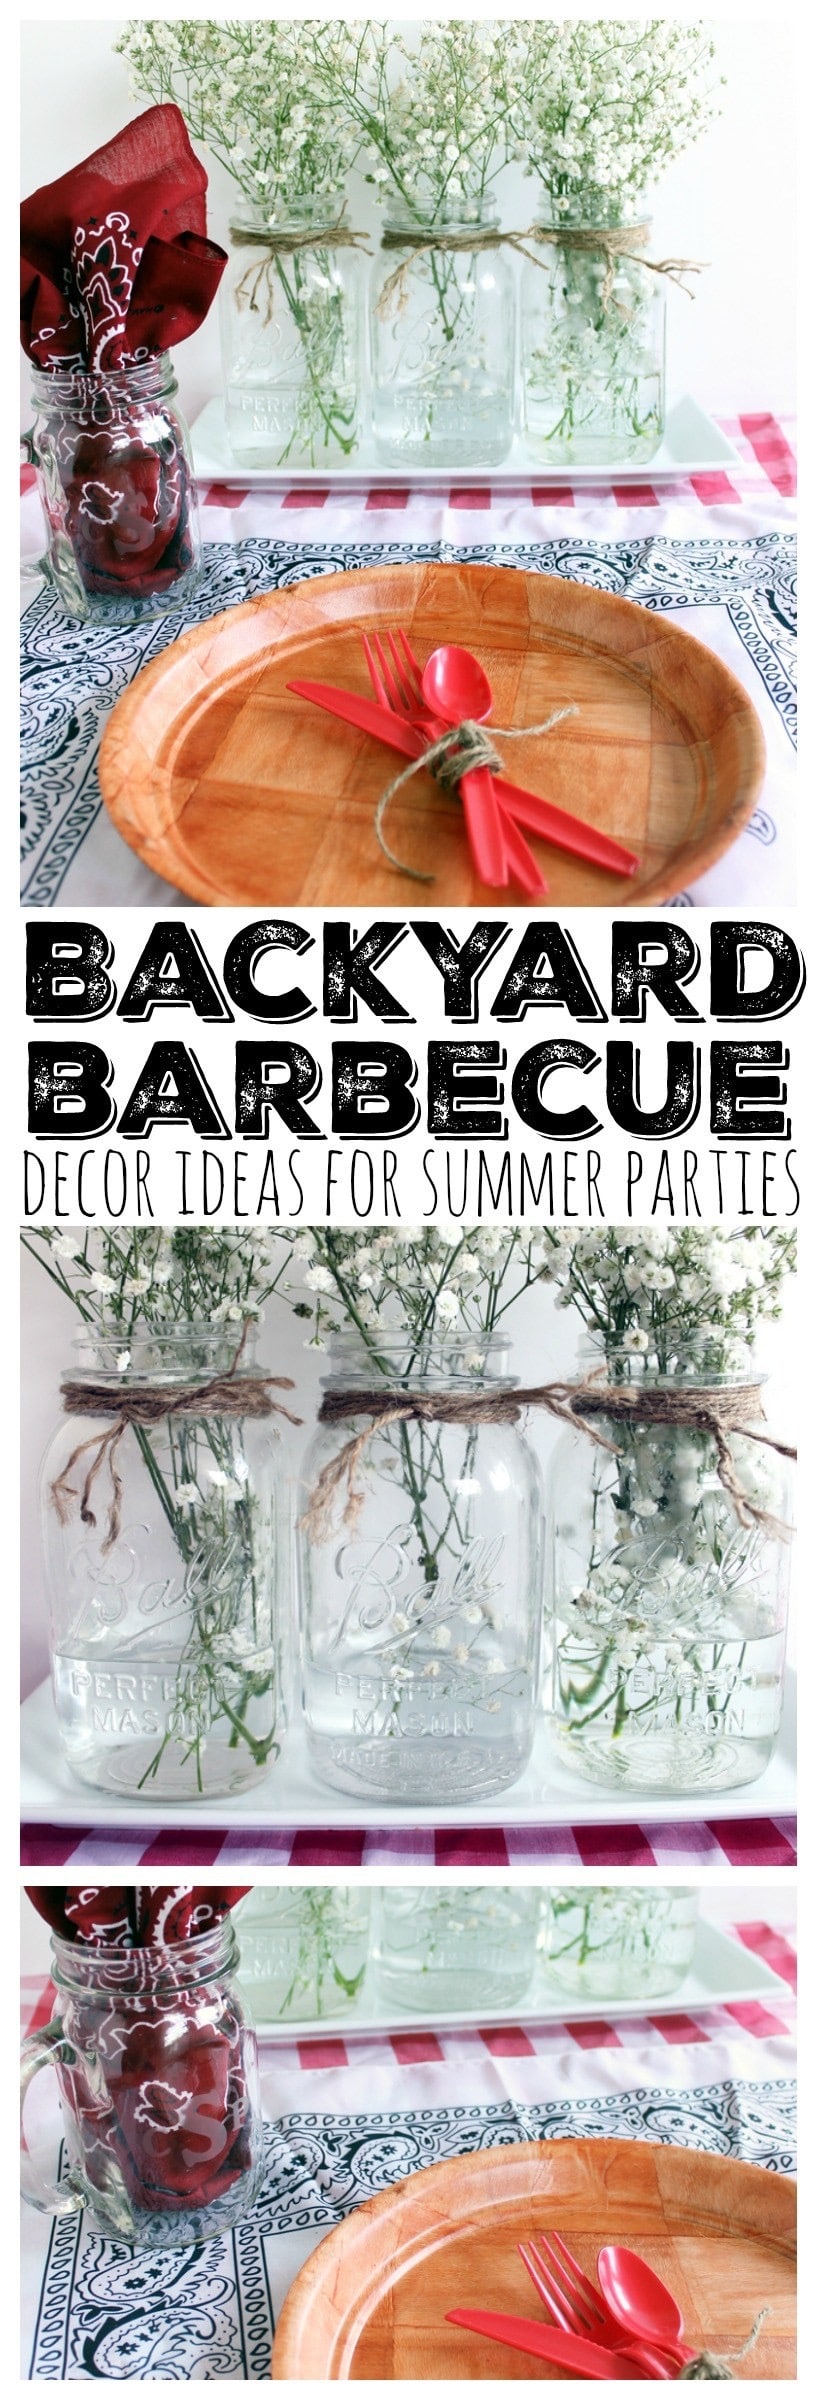 Ideas for Summer Parties - The Country Chic Cottage